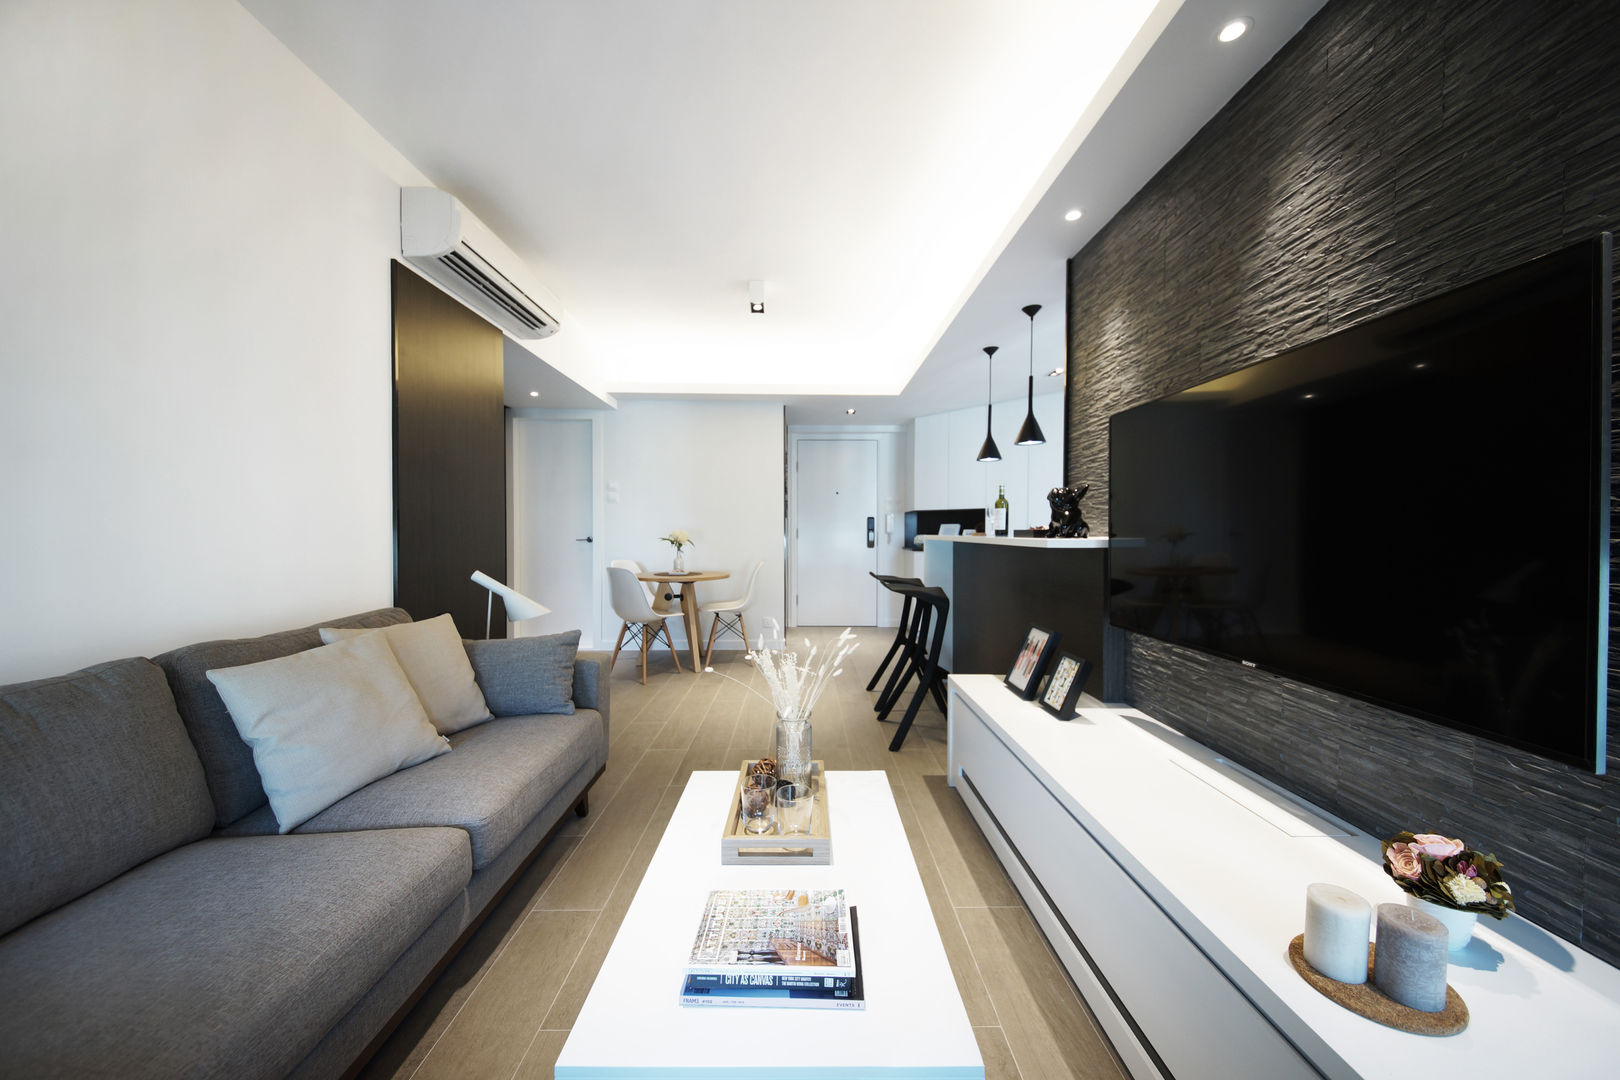 Shared contemporary home for grown-up brother and sister, Zip Interiors Ltd Zip Interiors Ltd residential,hong kong,private apartment,minimal,cozy home,home,contemporary home,living room